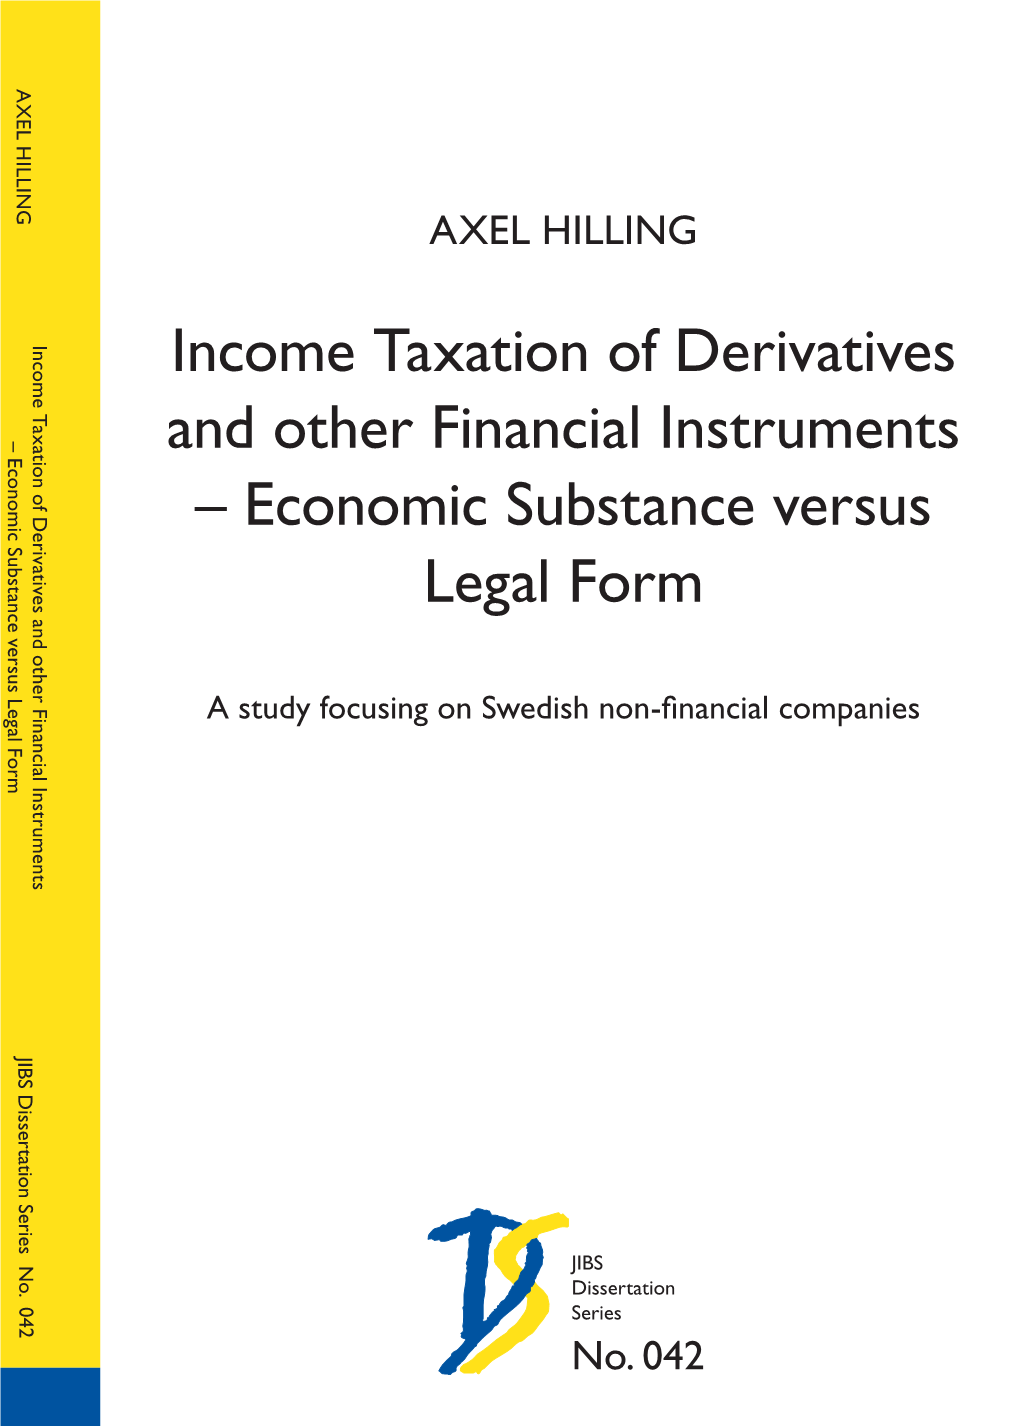 Income Taxation of Derivatives and Other Financial